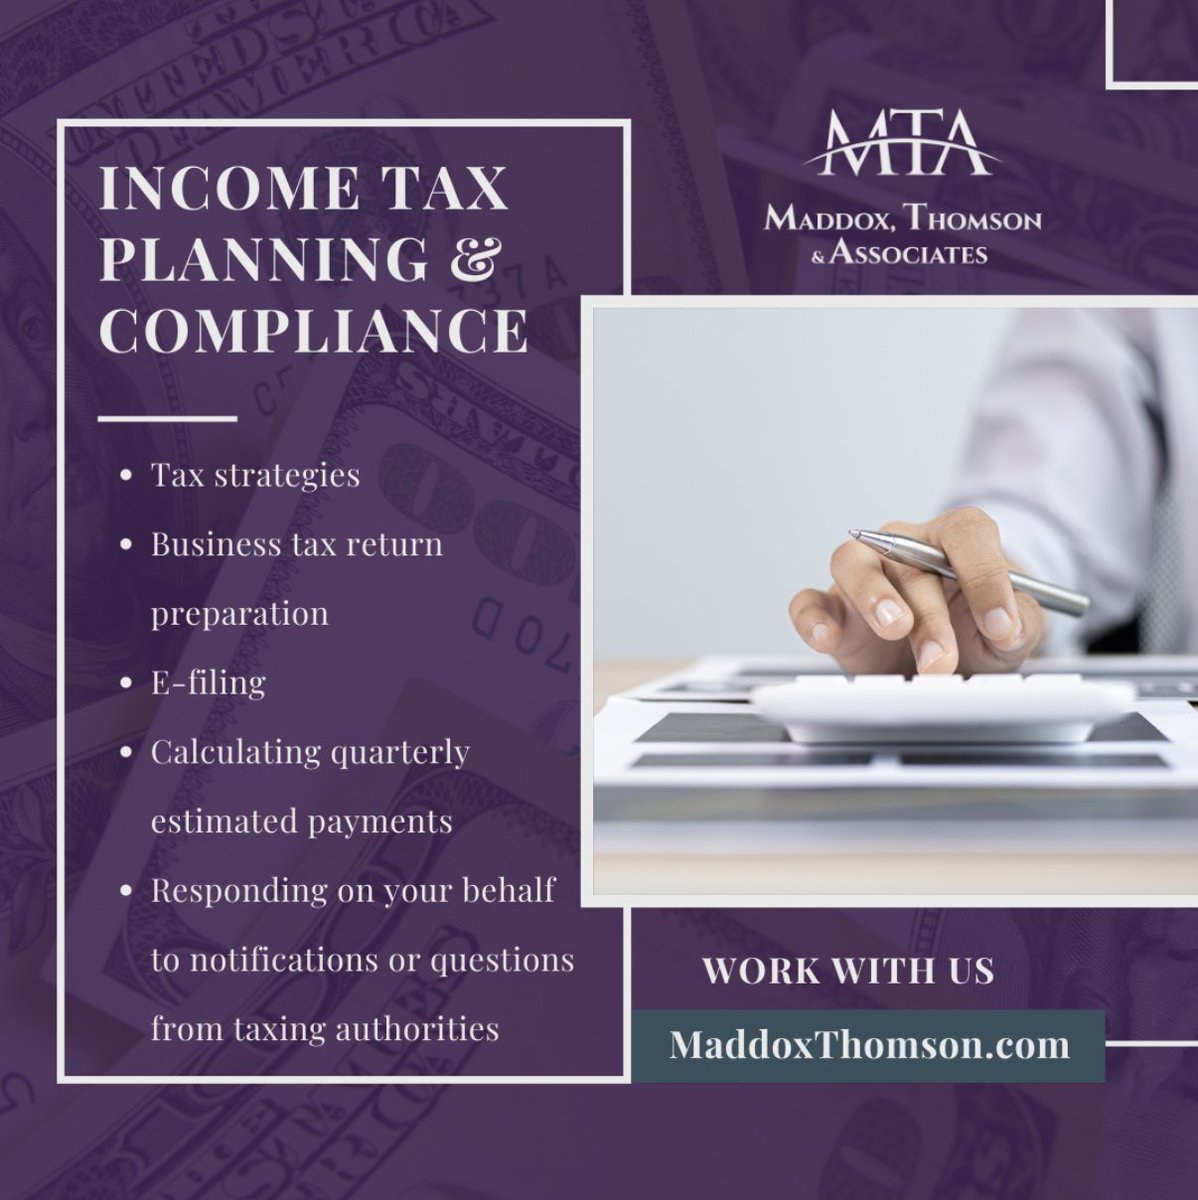 Income tax is all about compliance and communication. MTA provides its clients with innovative and proactive solutions for all their tax preparation needs. Discover more at: buff.ly/3kRJMwm

#taxaccounting #taxes #accounting #taxreturn #2022taxes #taxseason #cpa